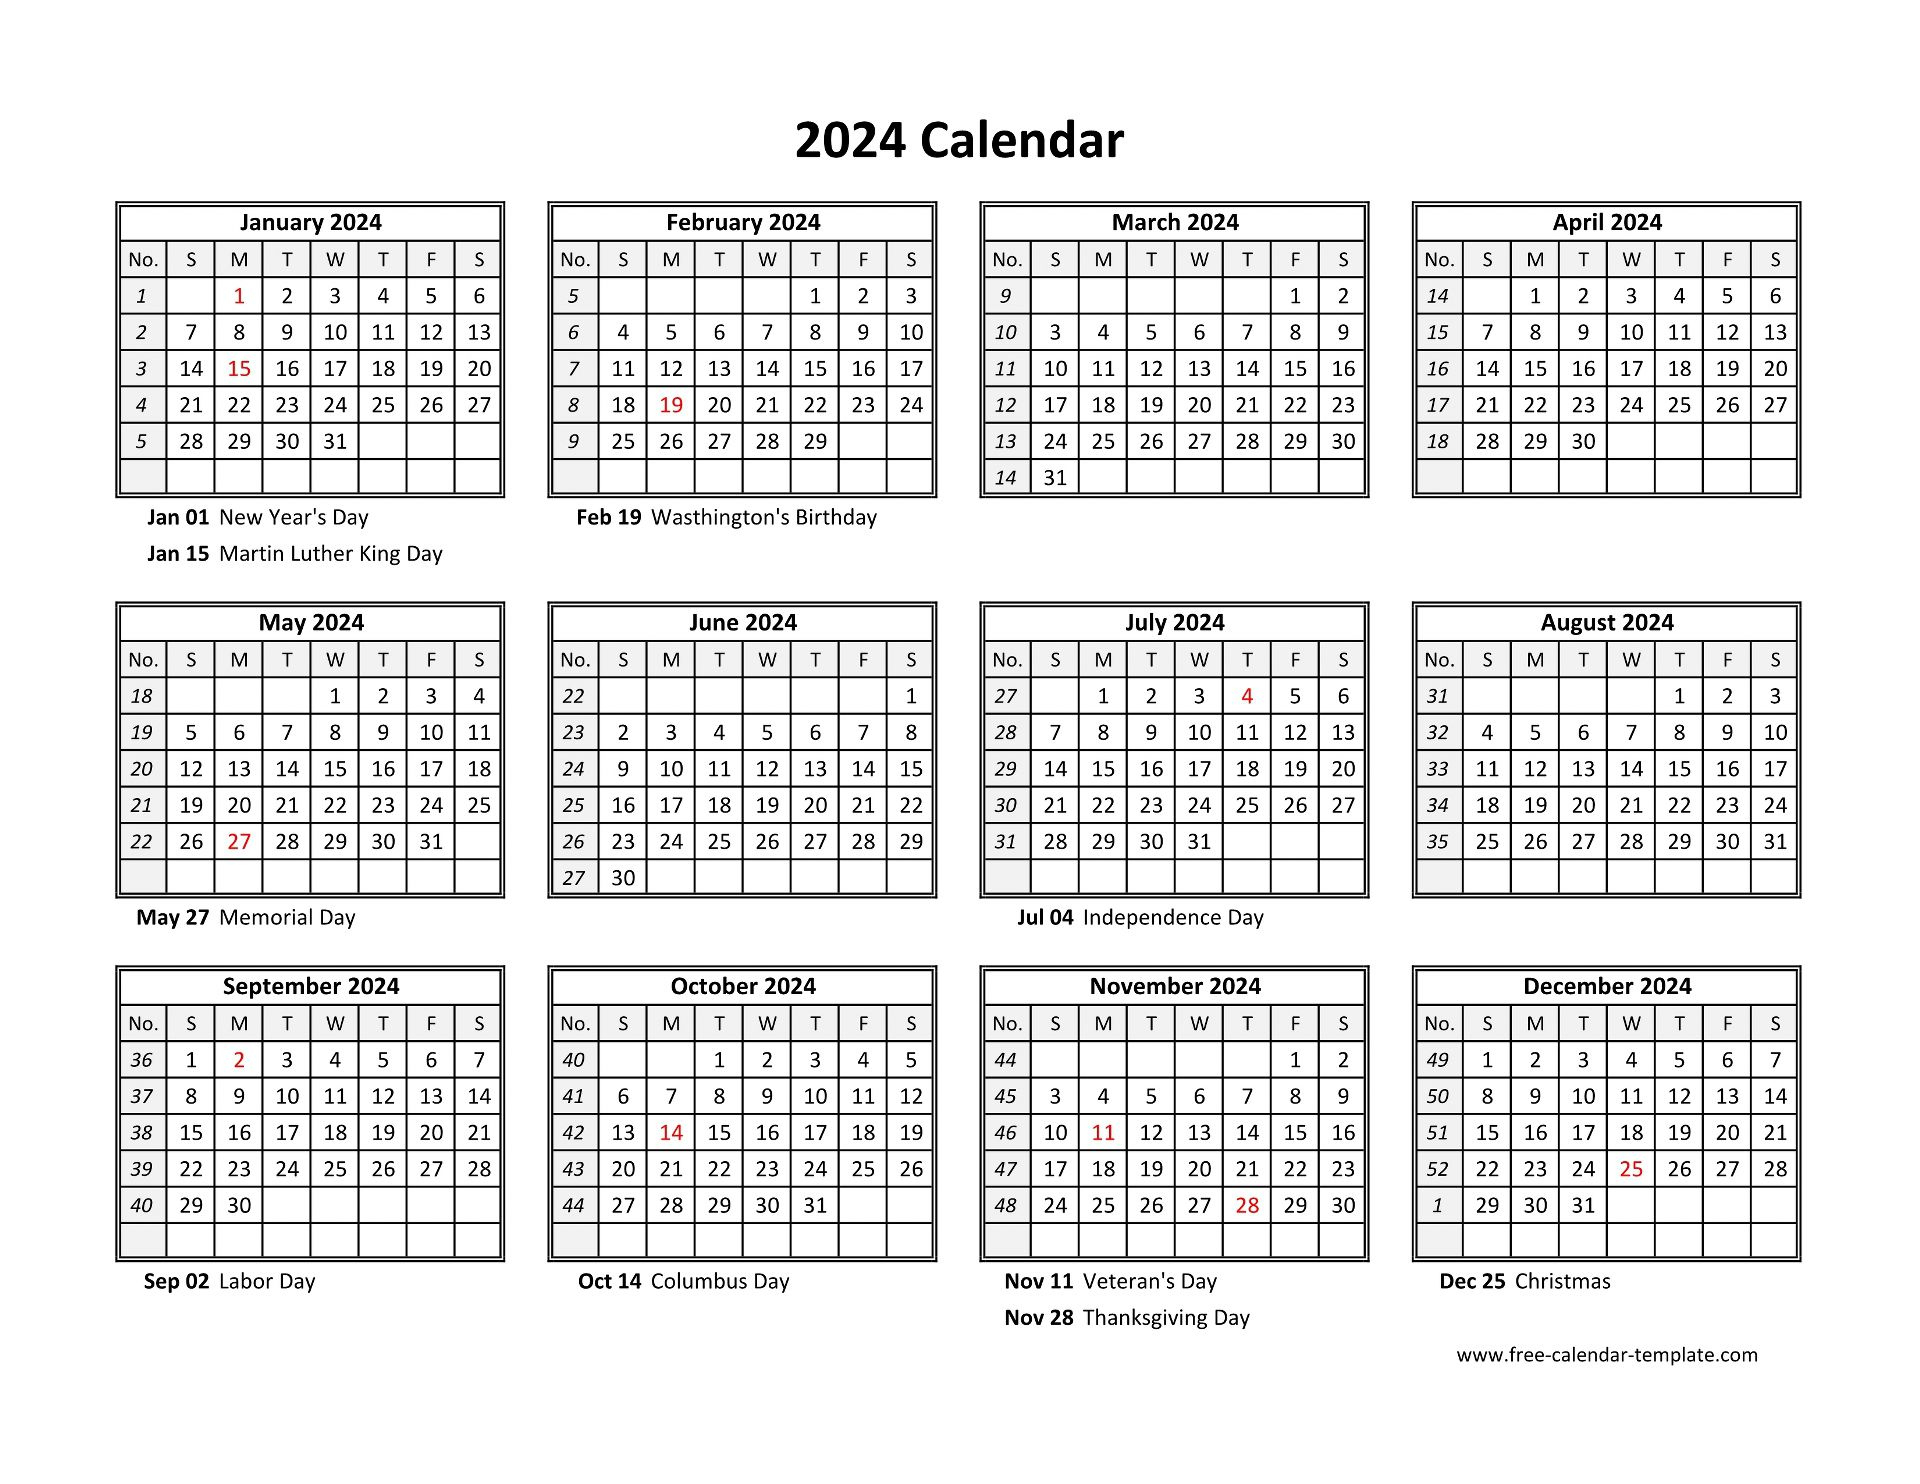 Yearly Calendar 2024 Printable With Federal Holidays | Free | Print A Calendar 2024